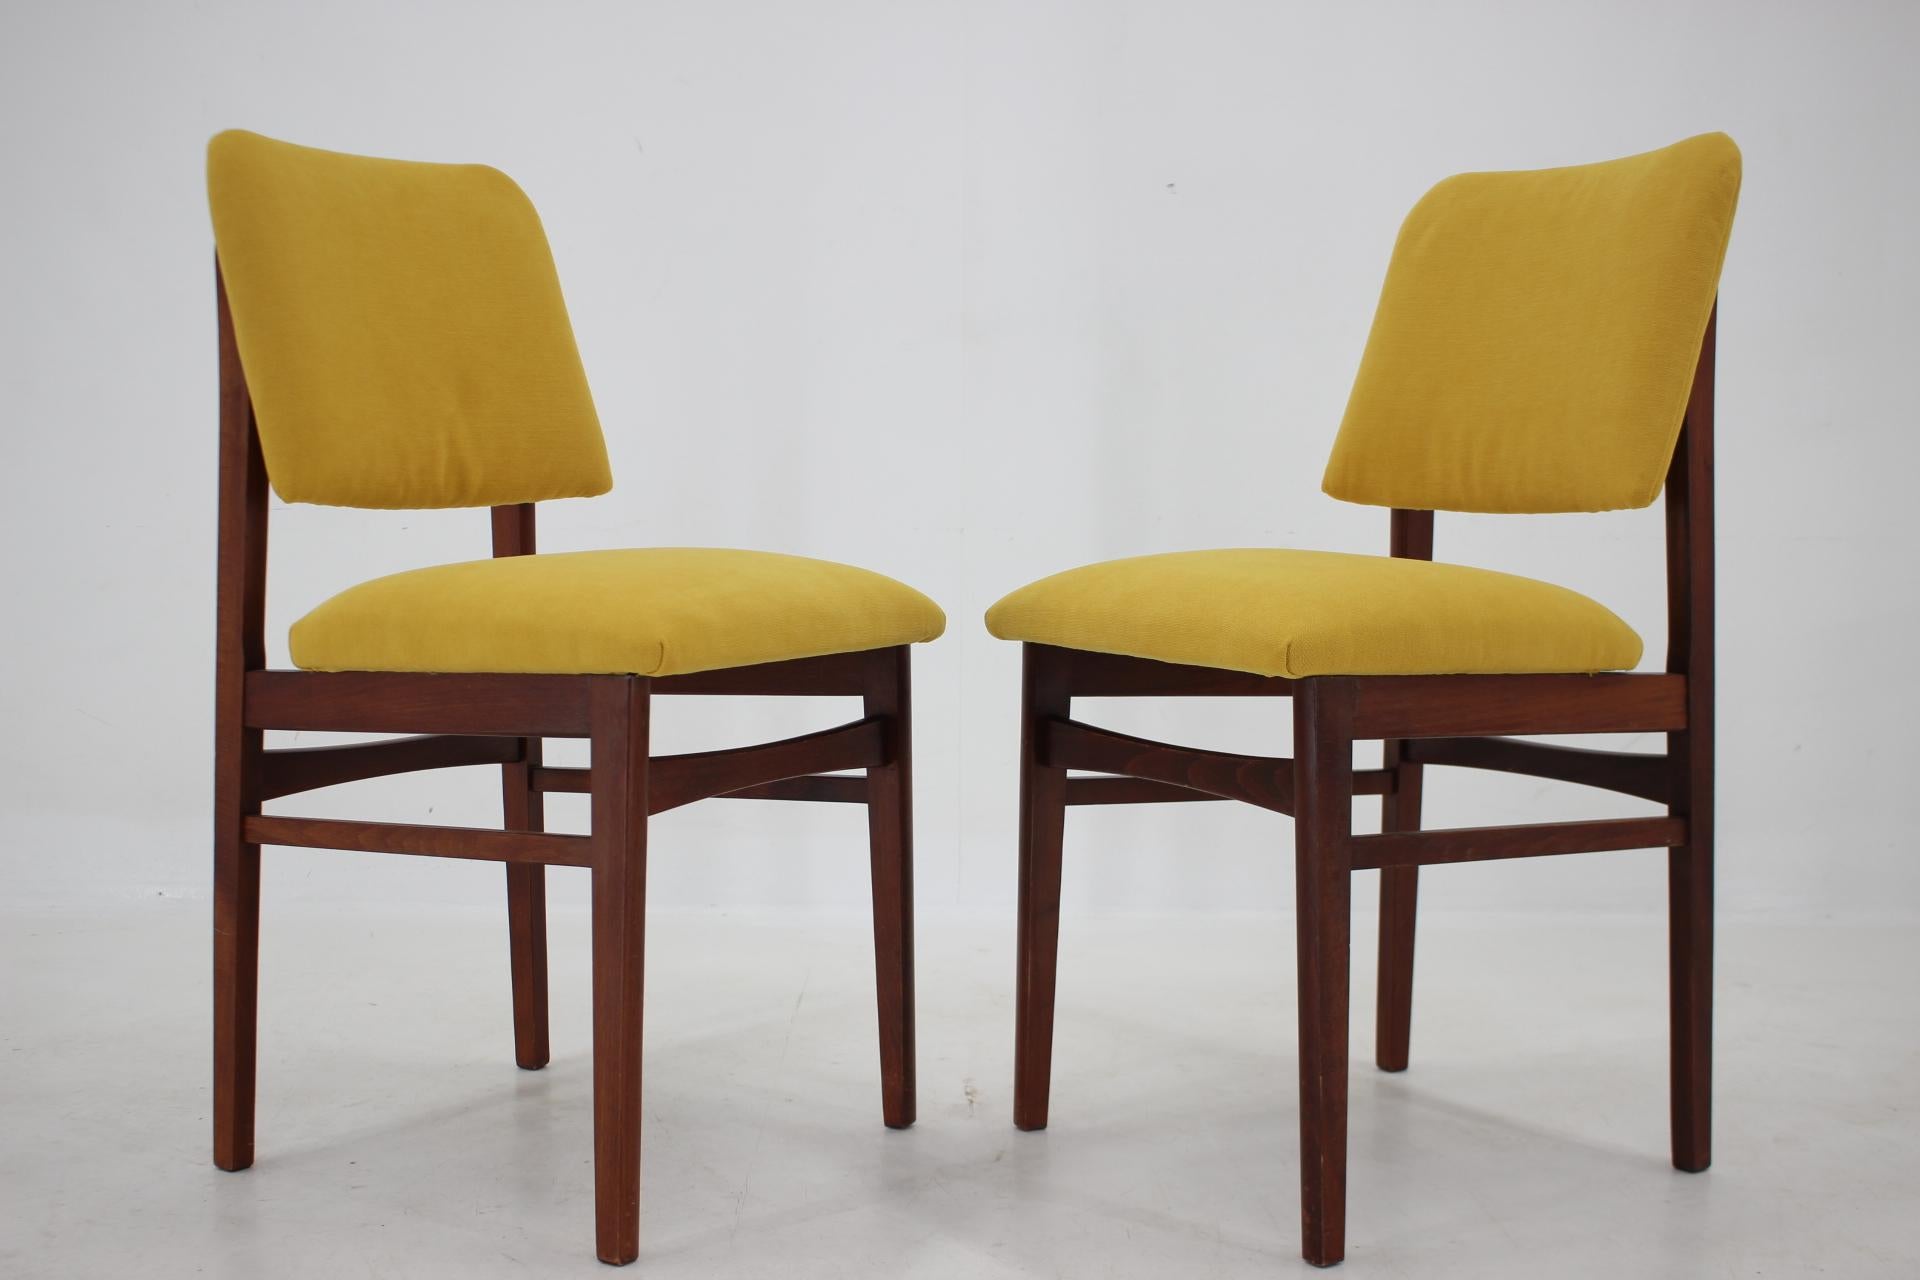 Polished 1960s Pair of Side Chairs, Czechoslovakia For Sale